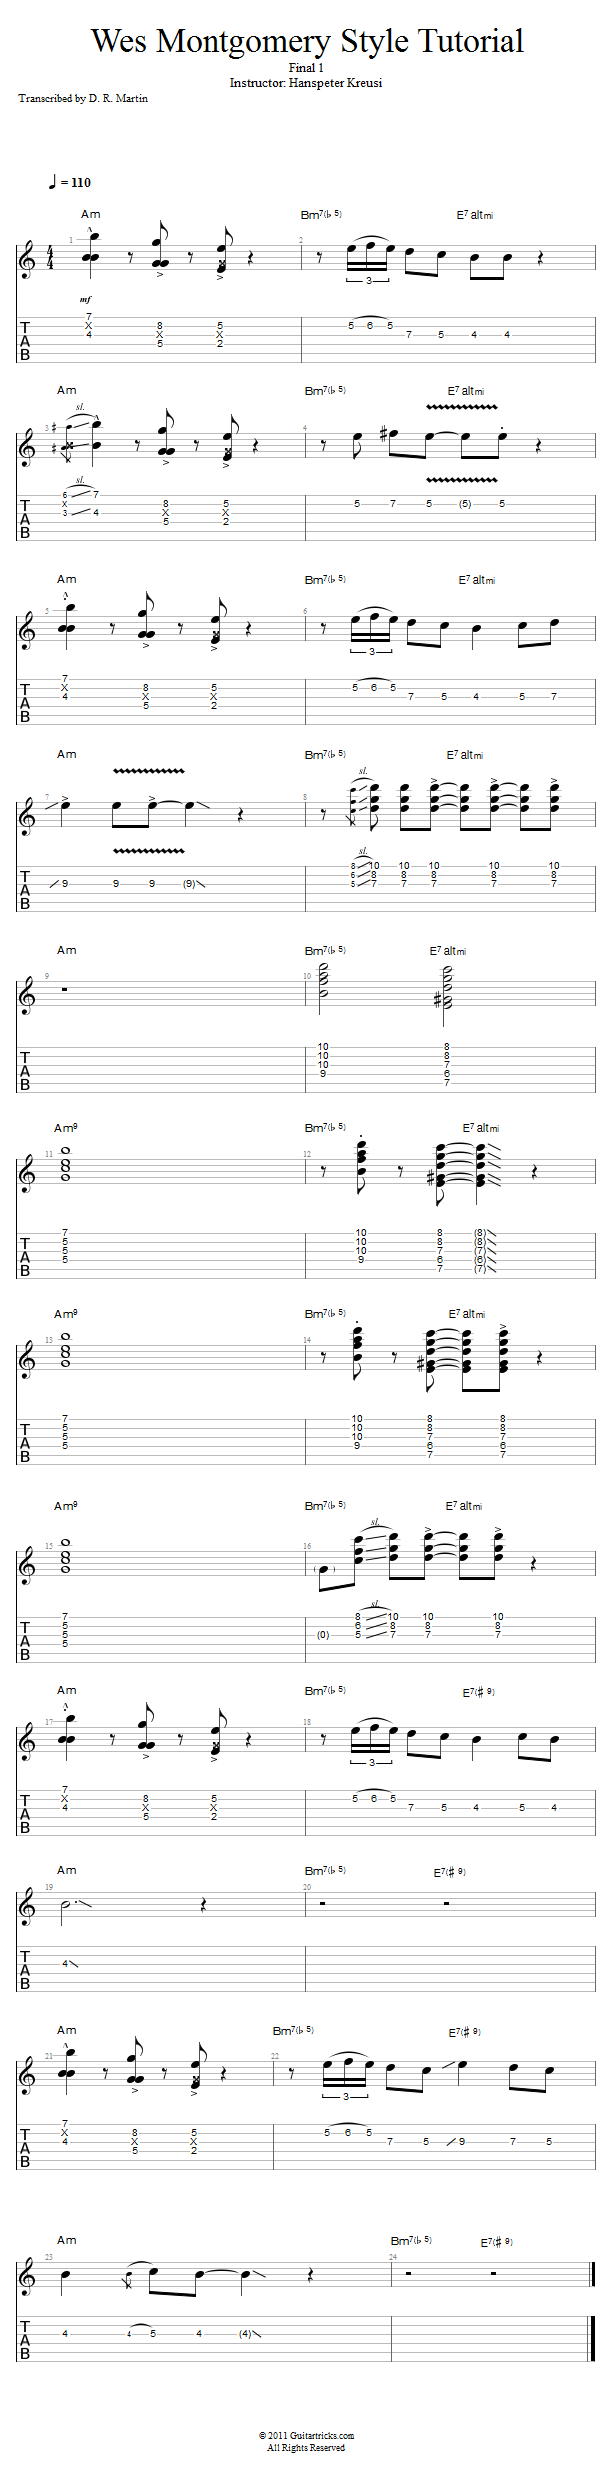 Wes Montgomery Style: Final 1 song notation